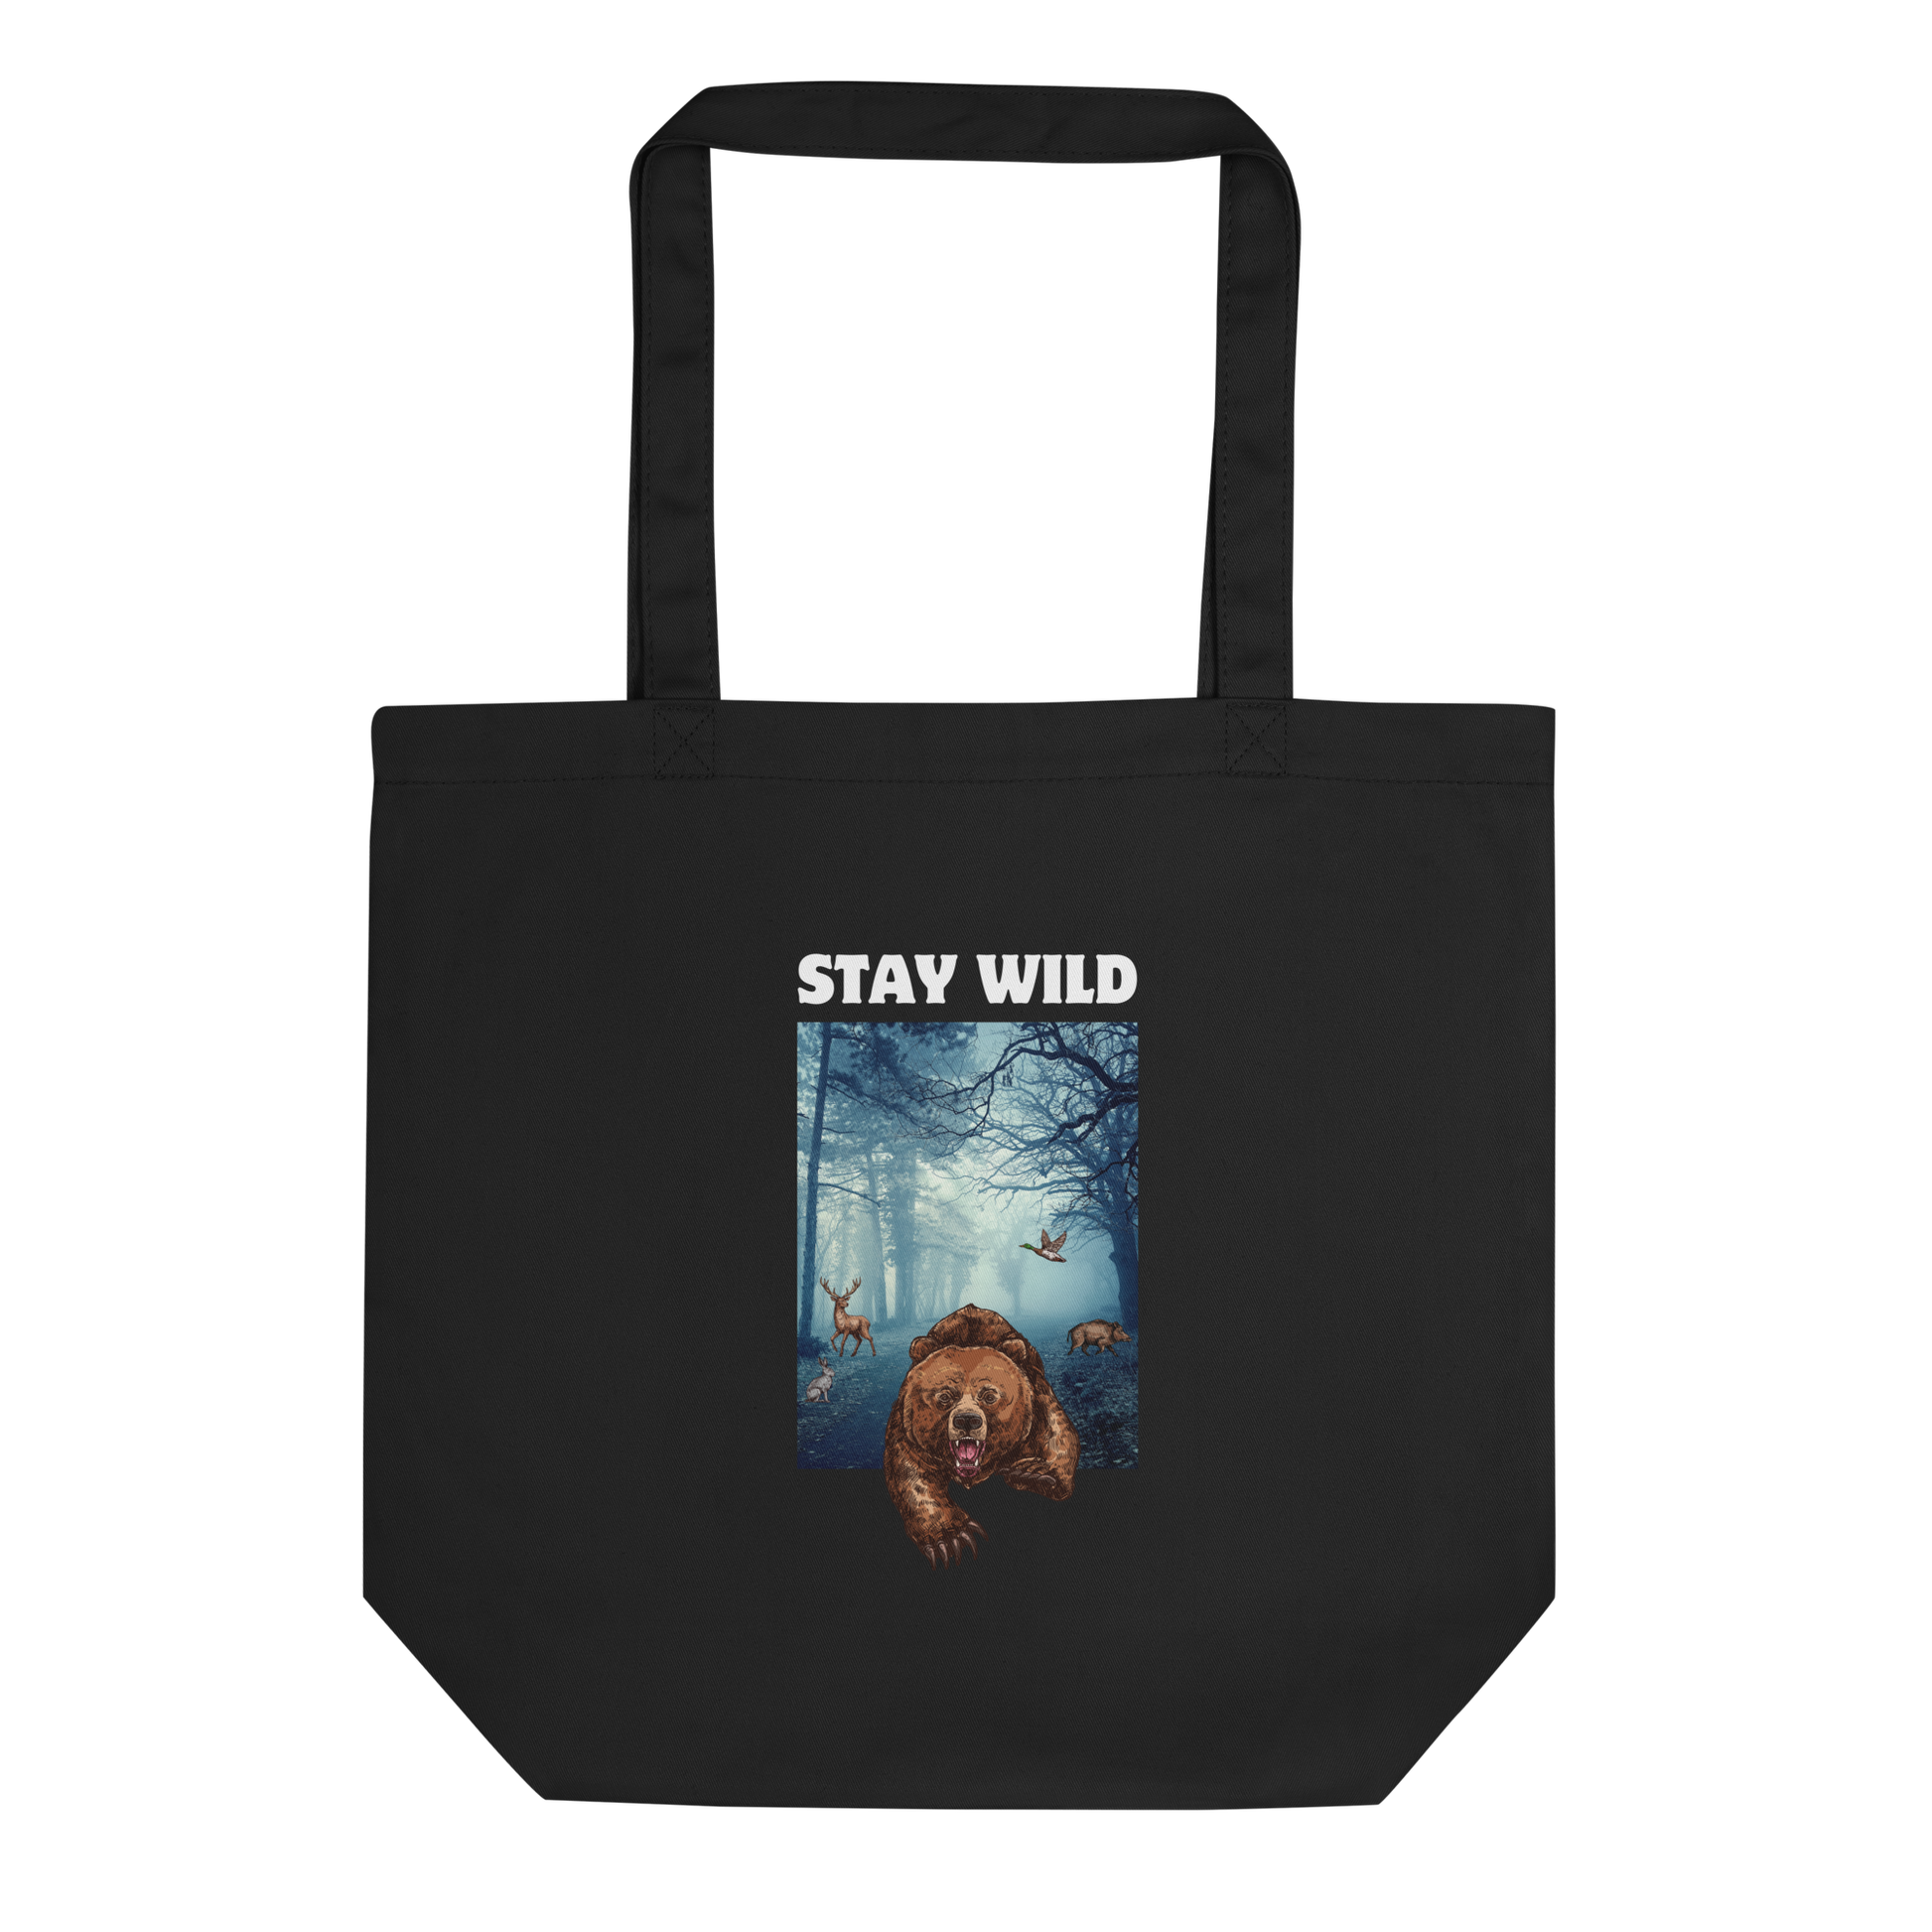 Black Bear Eco Tote Bag featuring a Stay Wild graphic - Cool Organic Cotton Totes - Boozy Fox